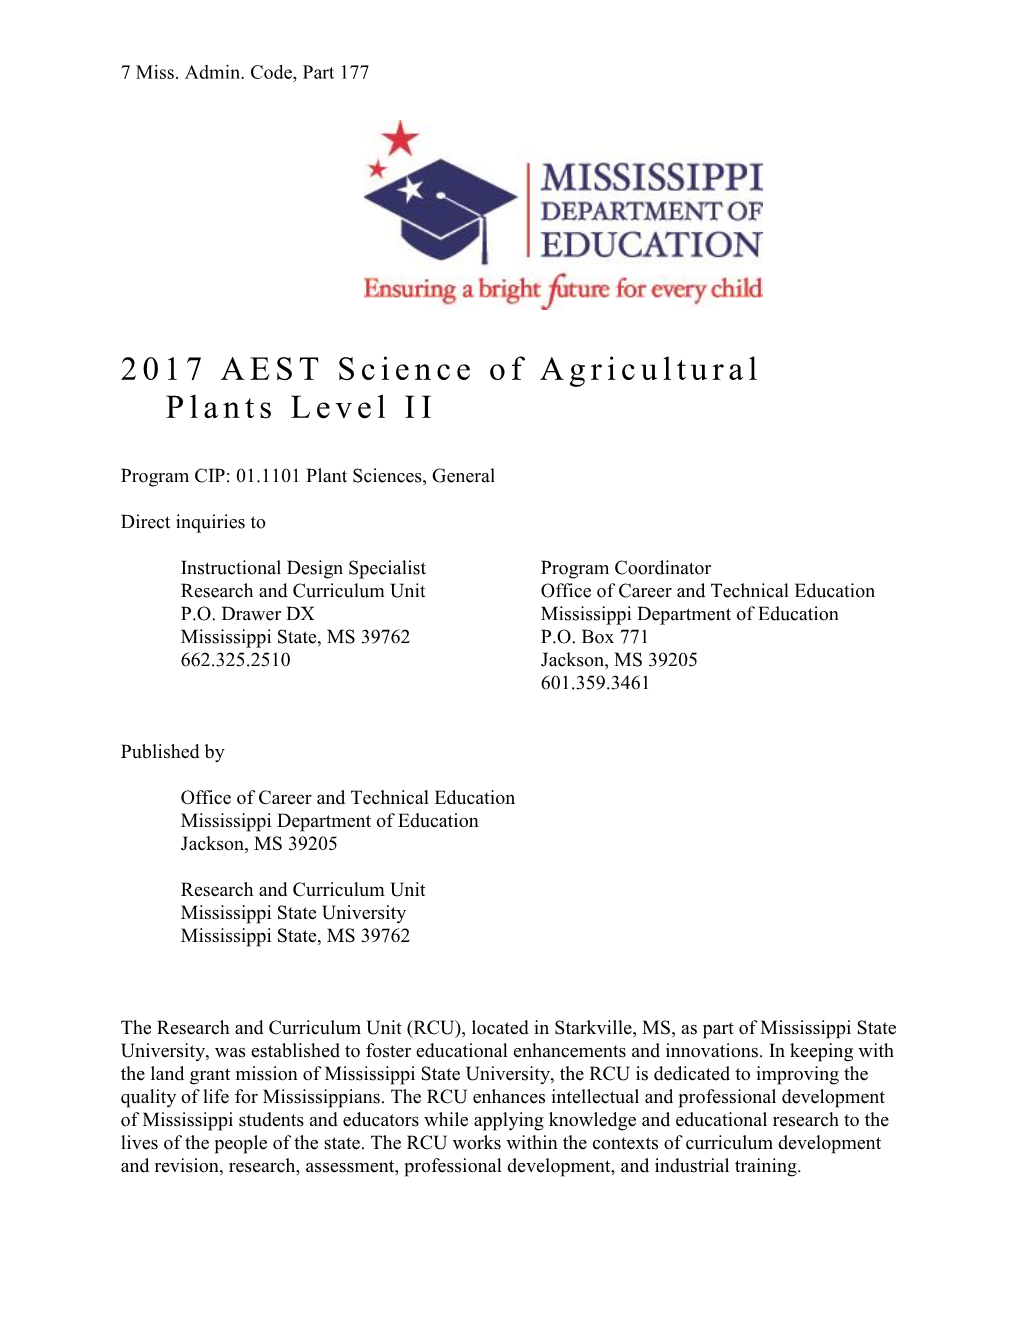 2017 AEST Science of Agricultural Plants Level II